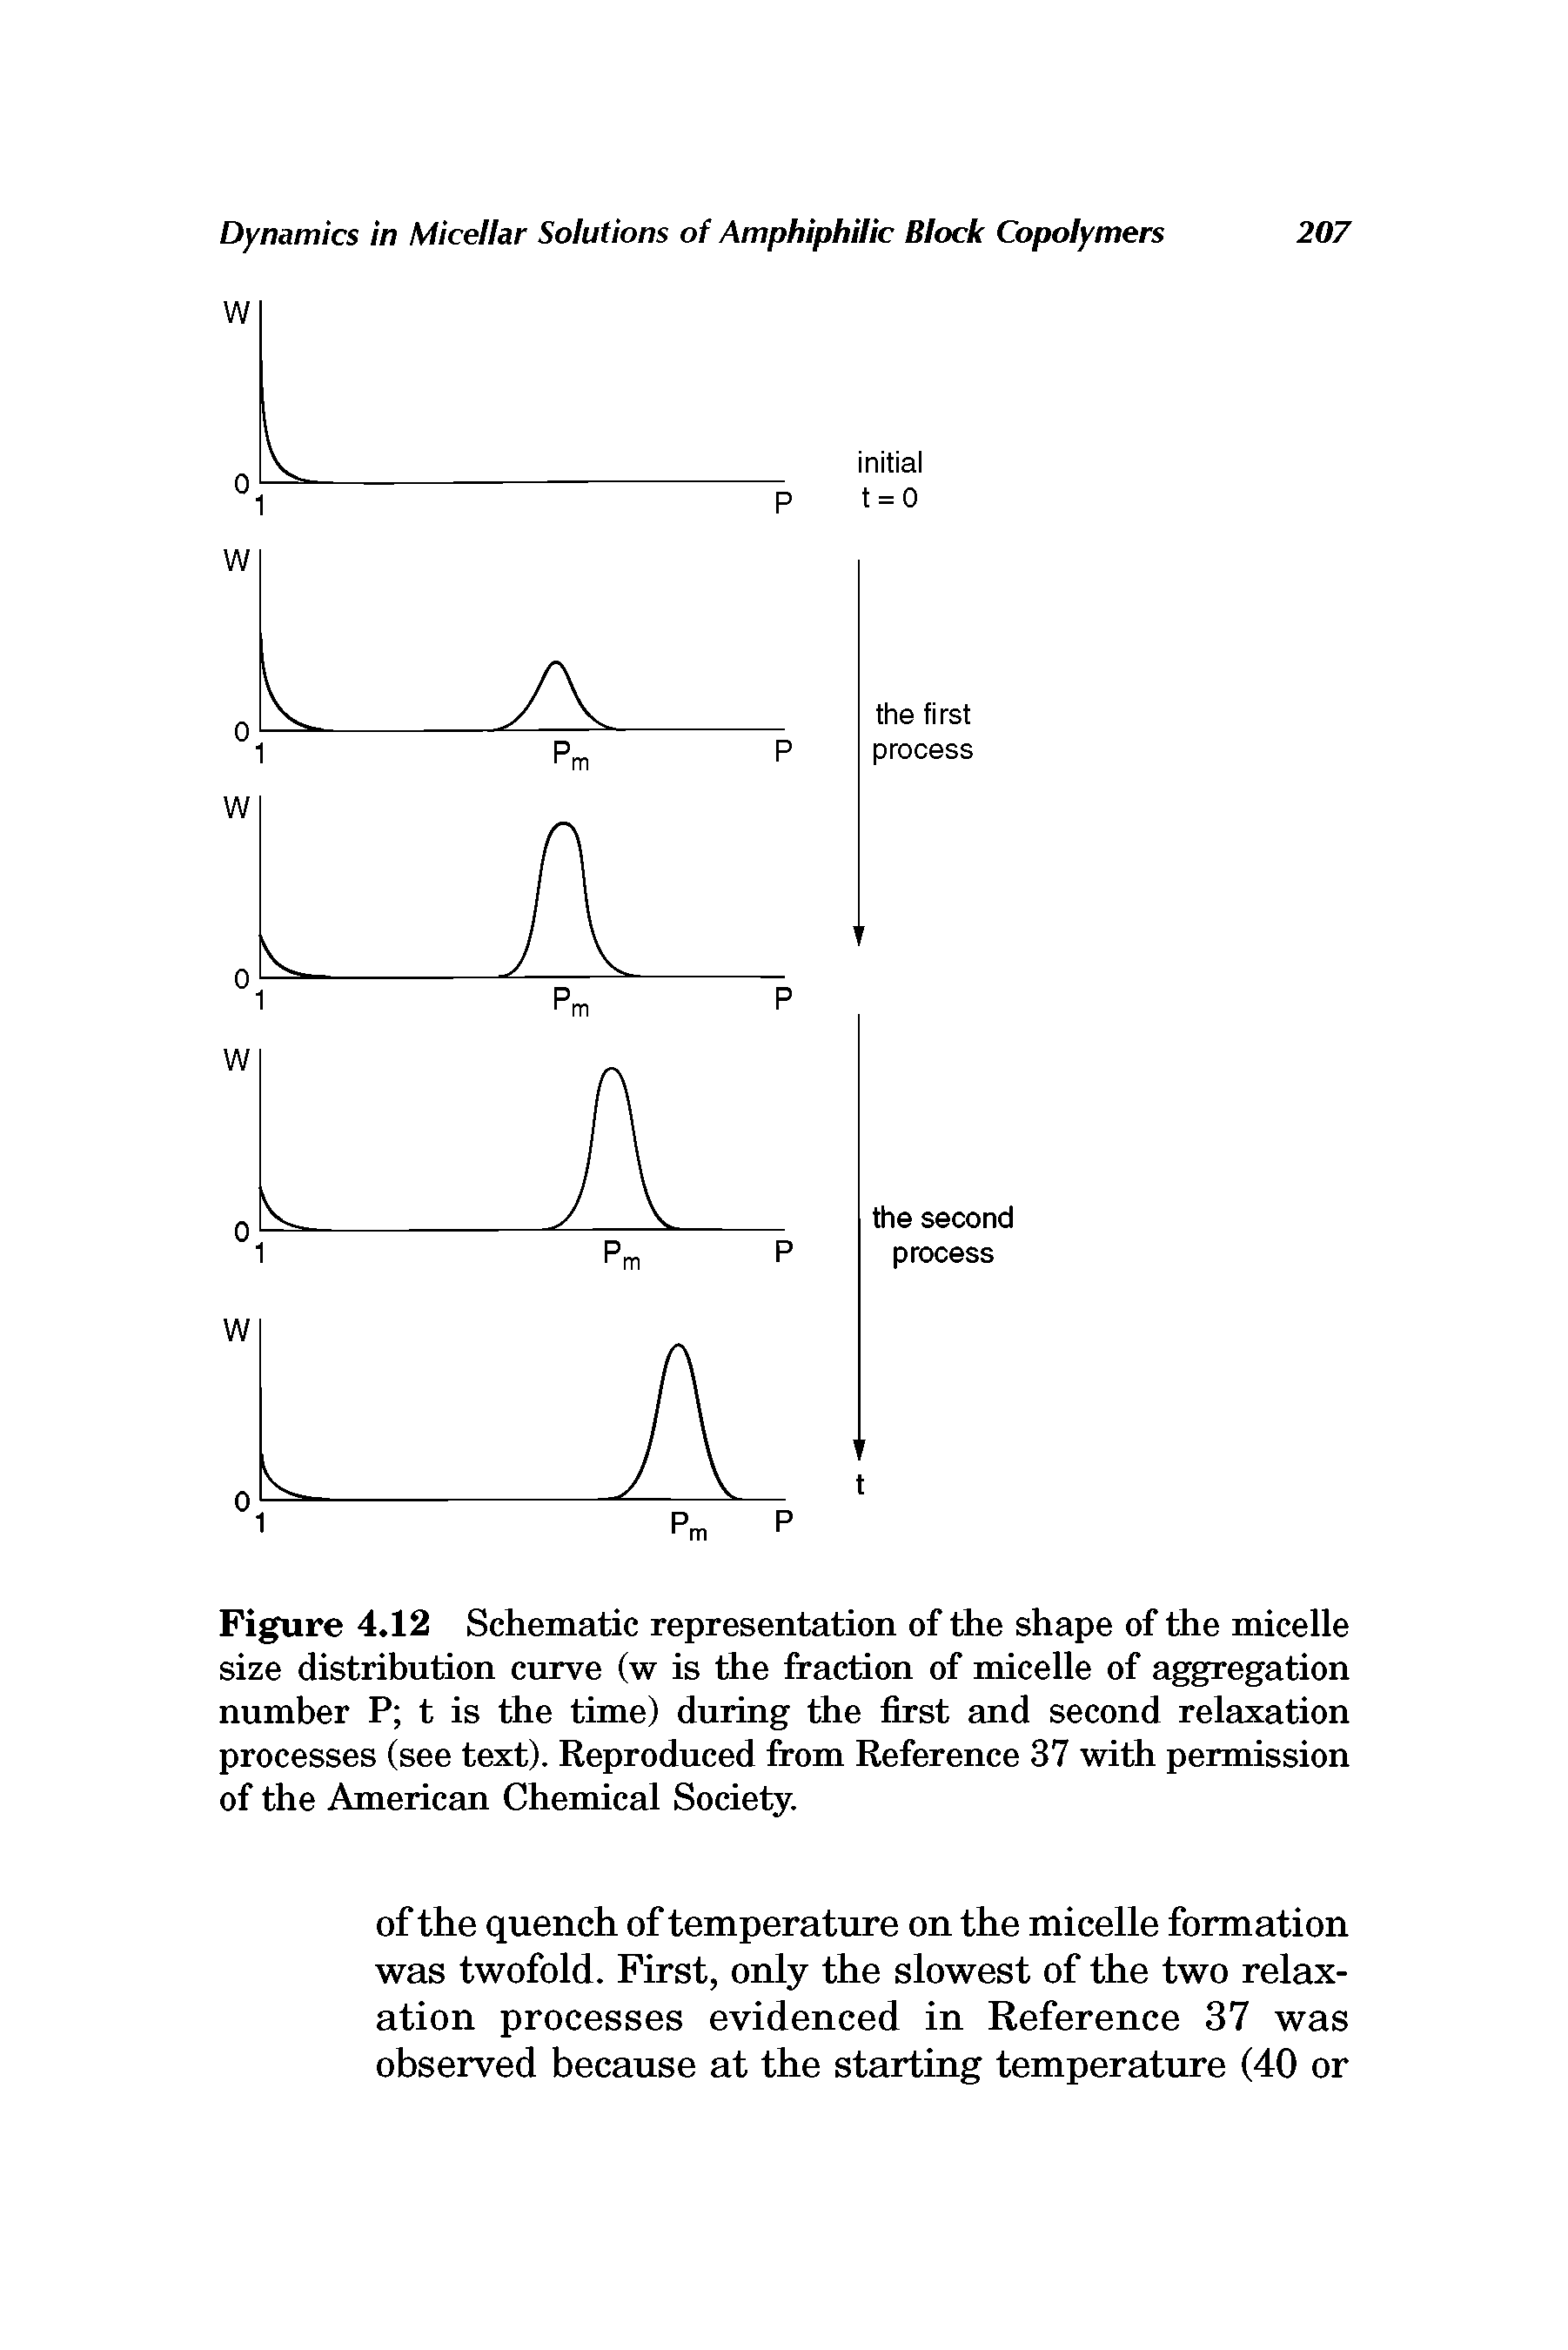 Figure 4.12 Schematic representation of the shape of the micelle size distribution curve (w is the fraction of micelle of aggregation number P t is the time) during the first and second relaxation processes (see text). Reproduced from Reference 37 with permission of the American Chemical Society.